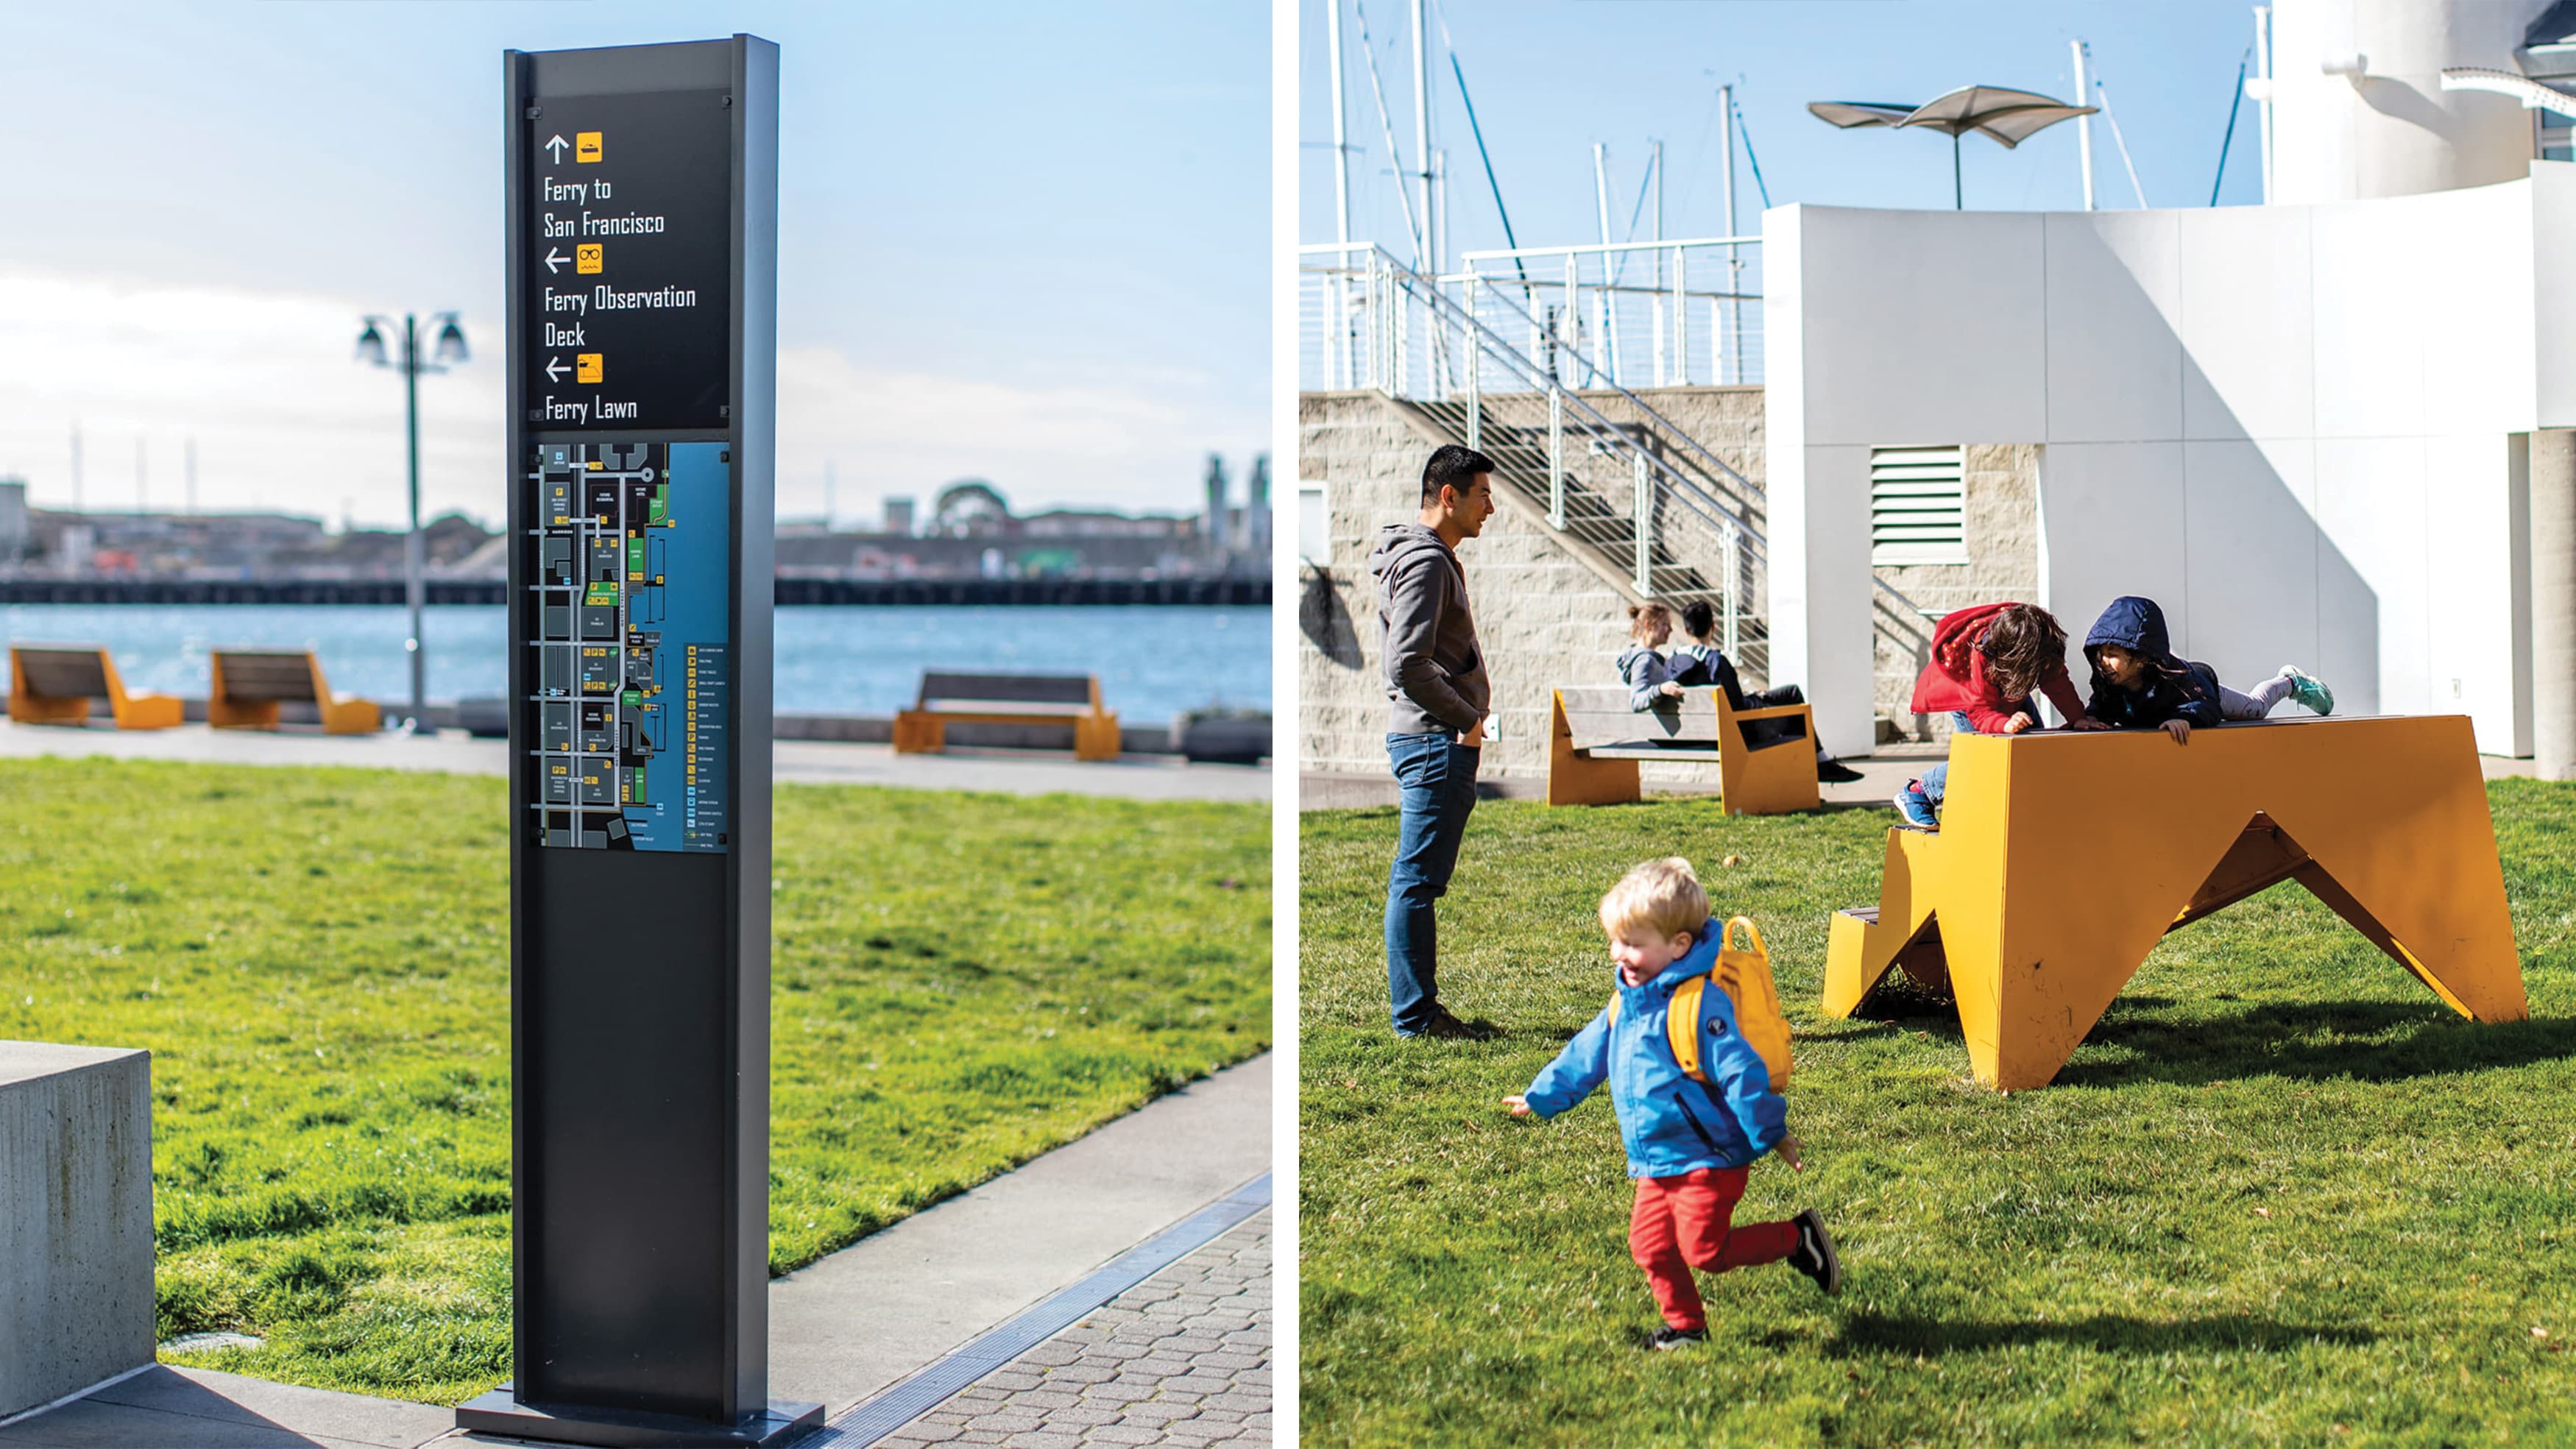 A directory sign at Jack London Square and bright yellow geometric benches in grass with kids playing